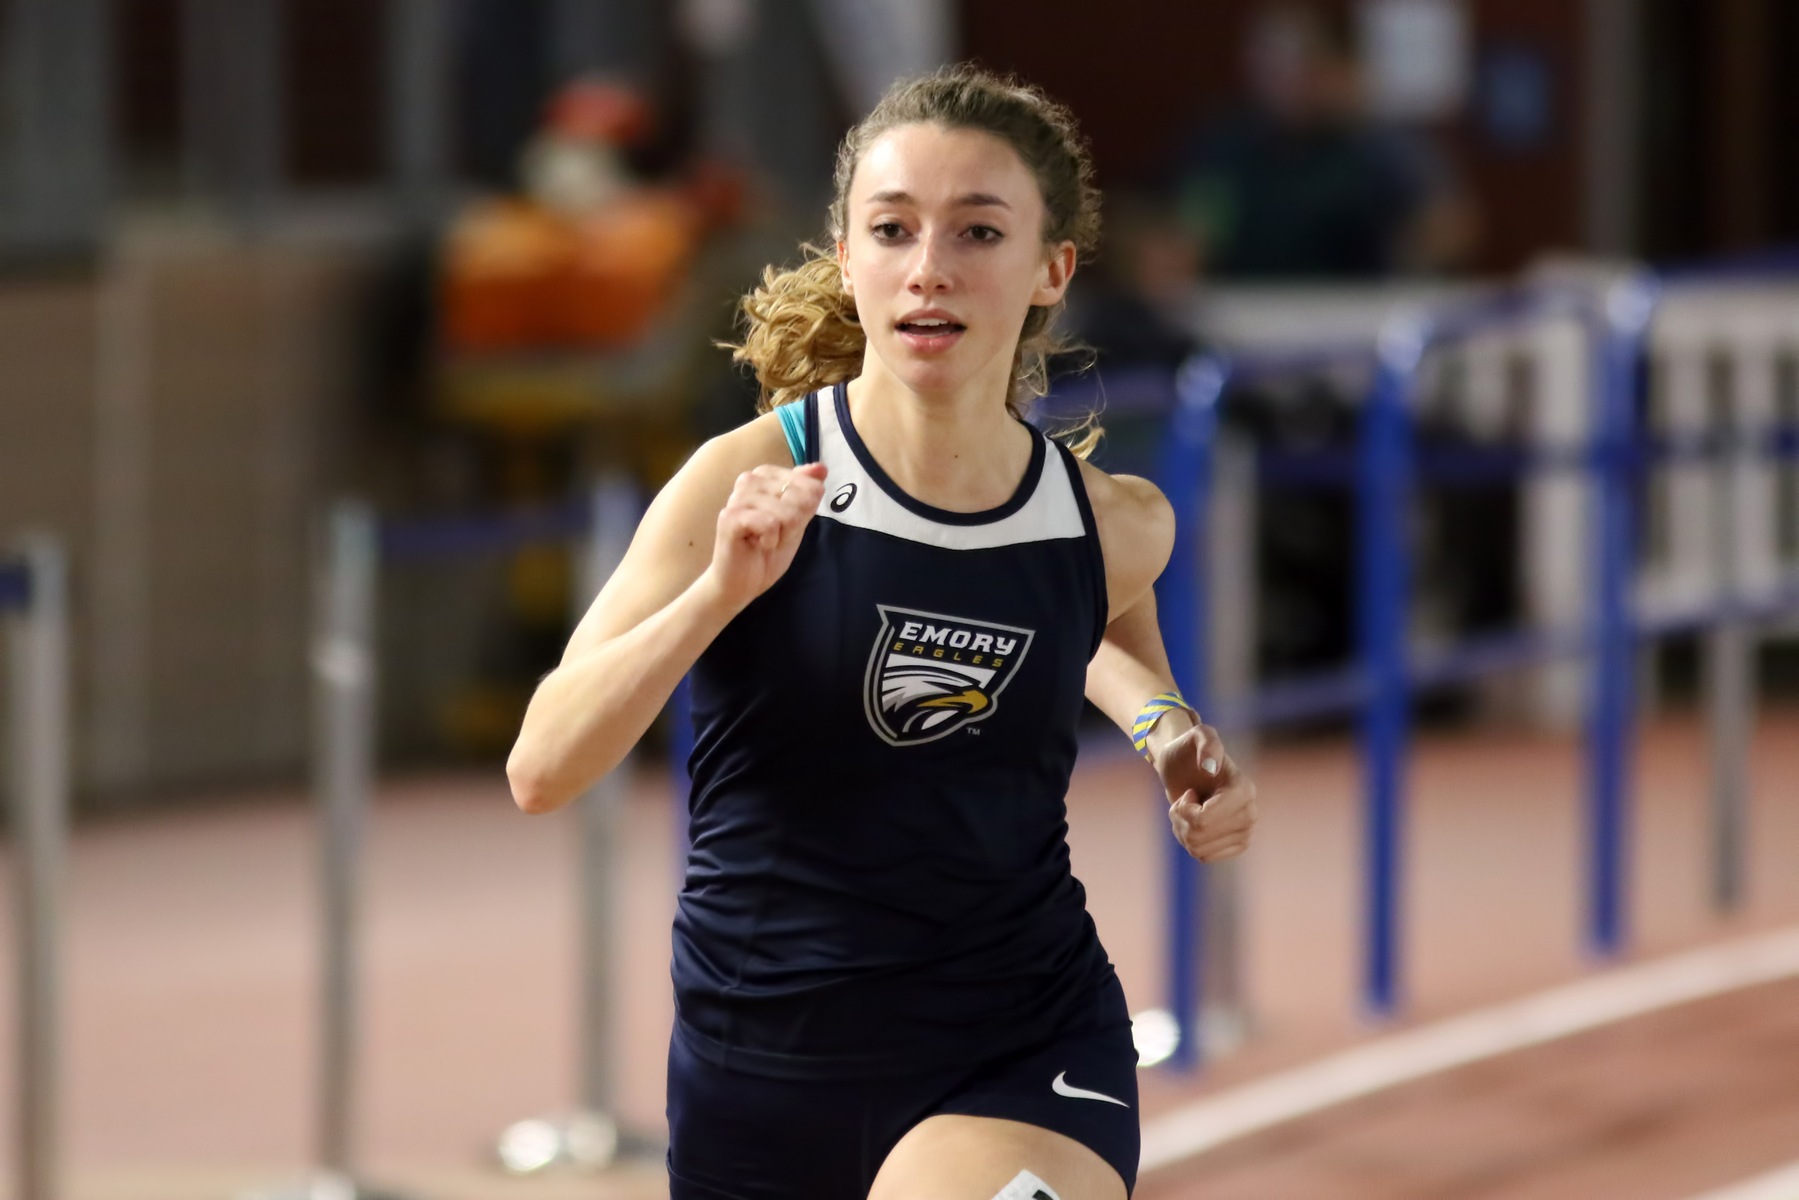 Emory Women's Track & Field Competes in Samford Bulldog Open, Sets 13 Personal-Records